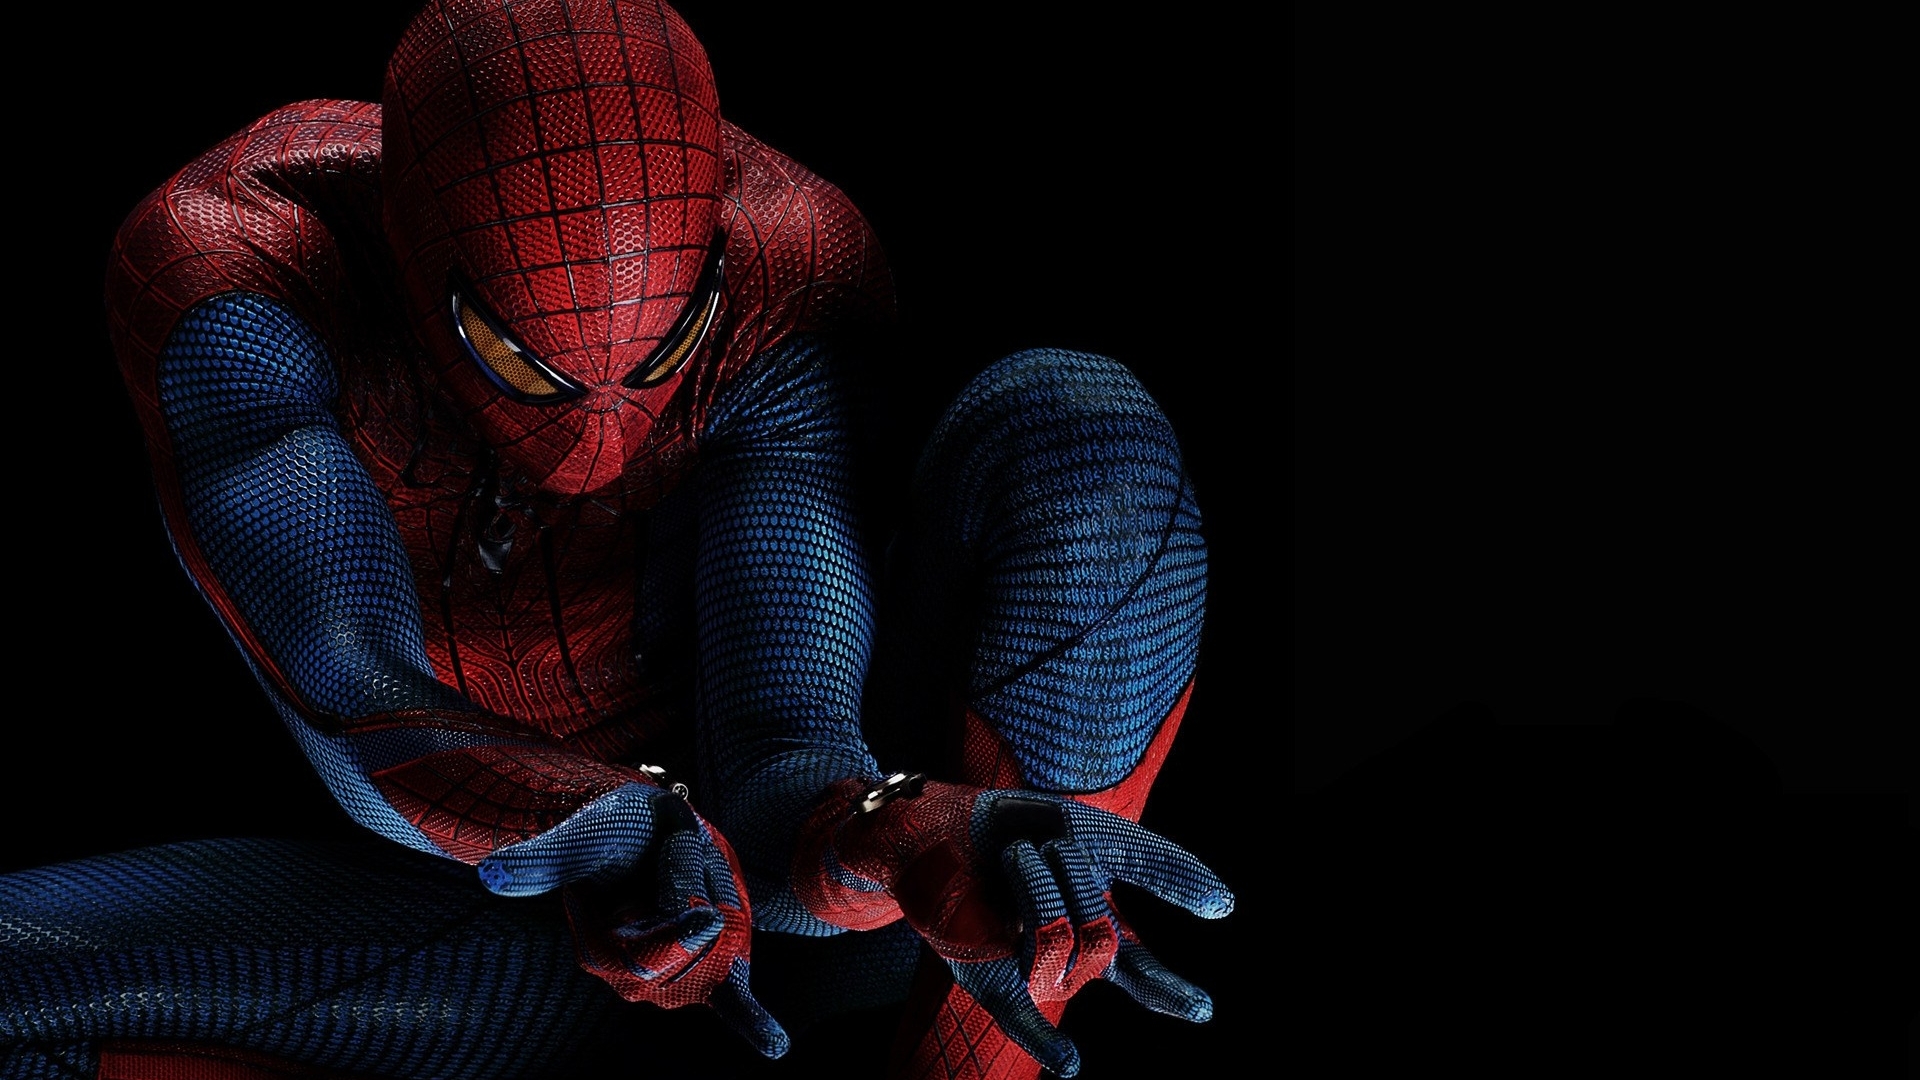 40672 download wallpaper cinema, spider man, black screensavers and pictures for free